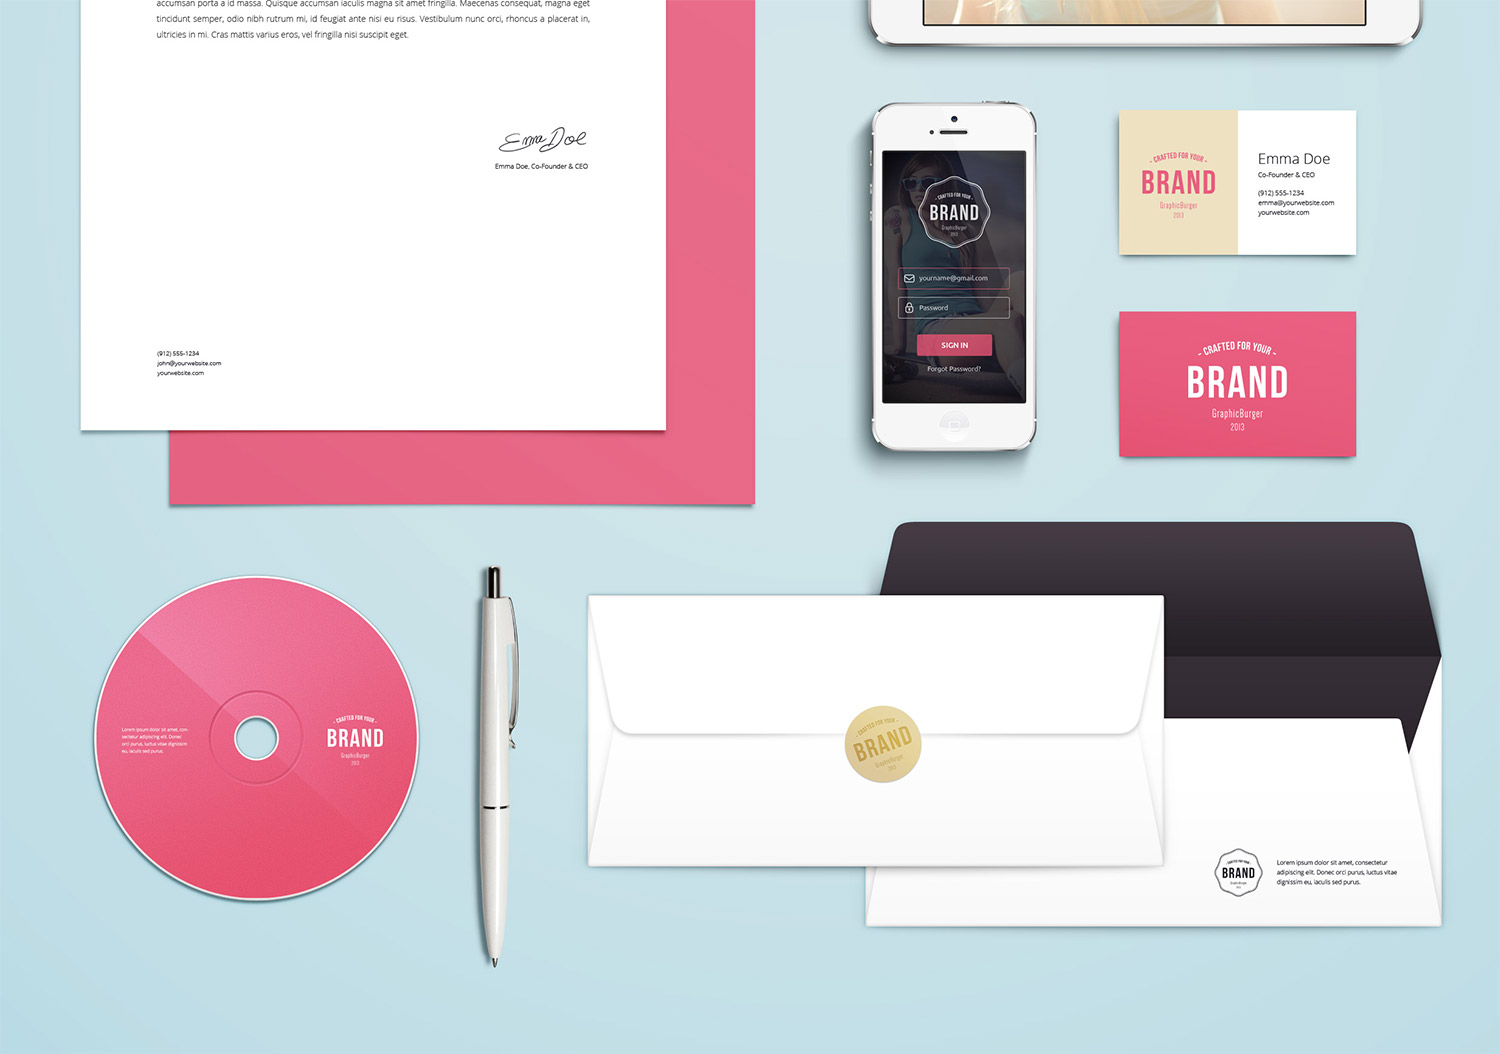 Download 25 Free Psd Templates To Mockup Your Print Designs